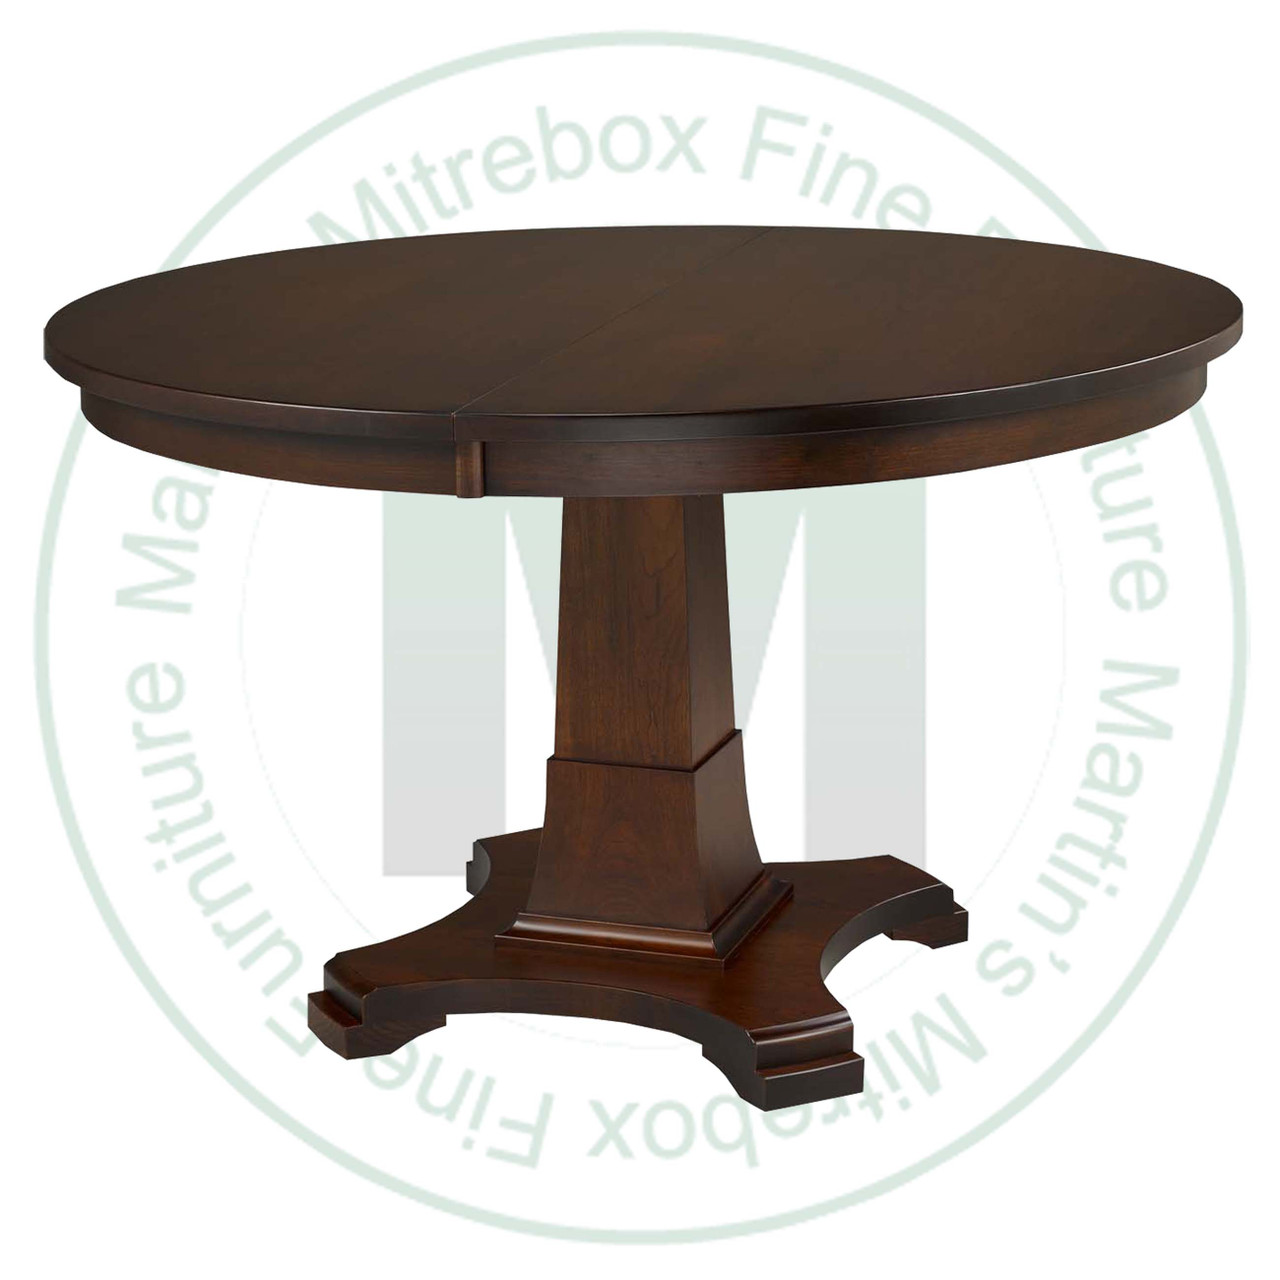 Maple Abbey Single Pedestal Table 60''D x 60''W x 30''H With 1 - 12'' Leaf. Table Has 1'' Thick Top